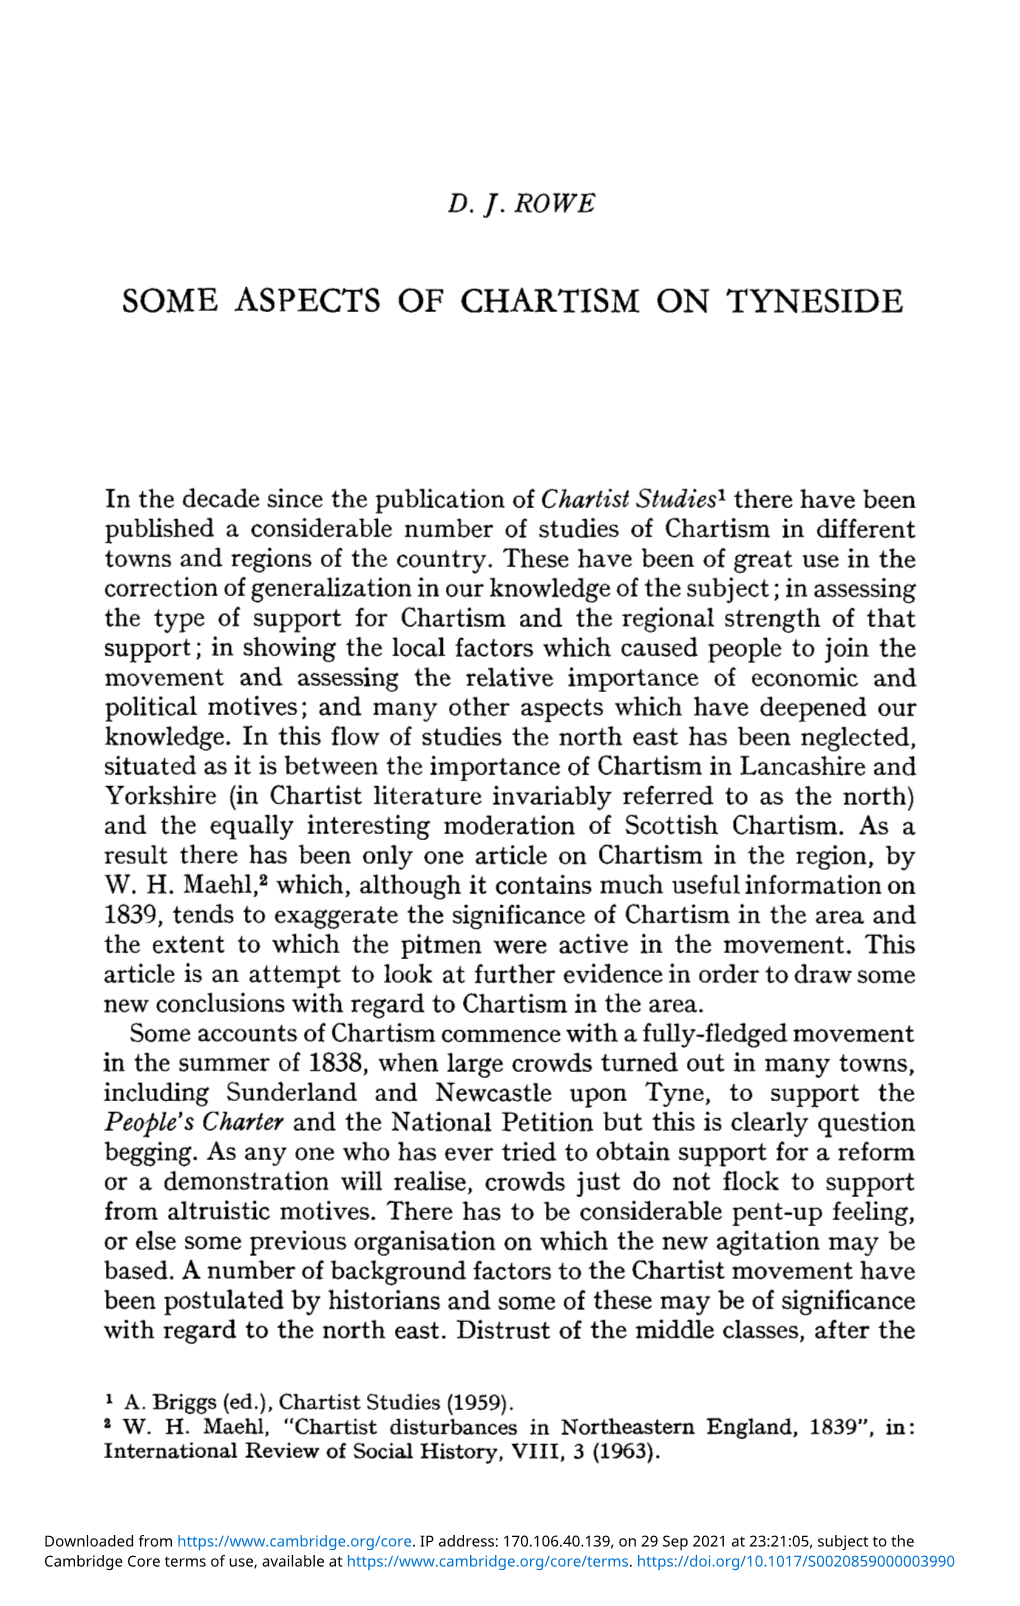 Some Aspects of Chartism on Tyneside